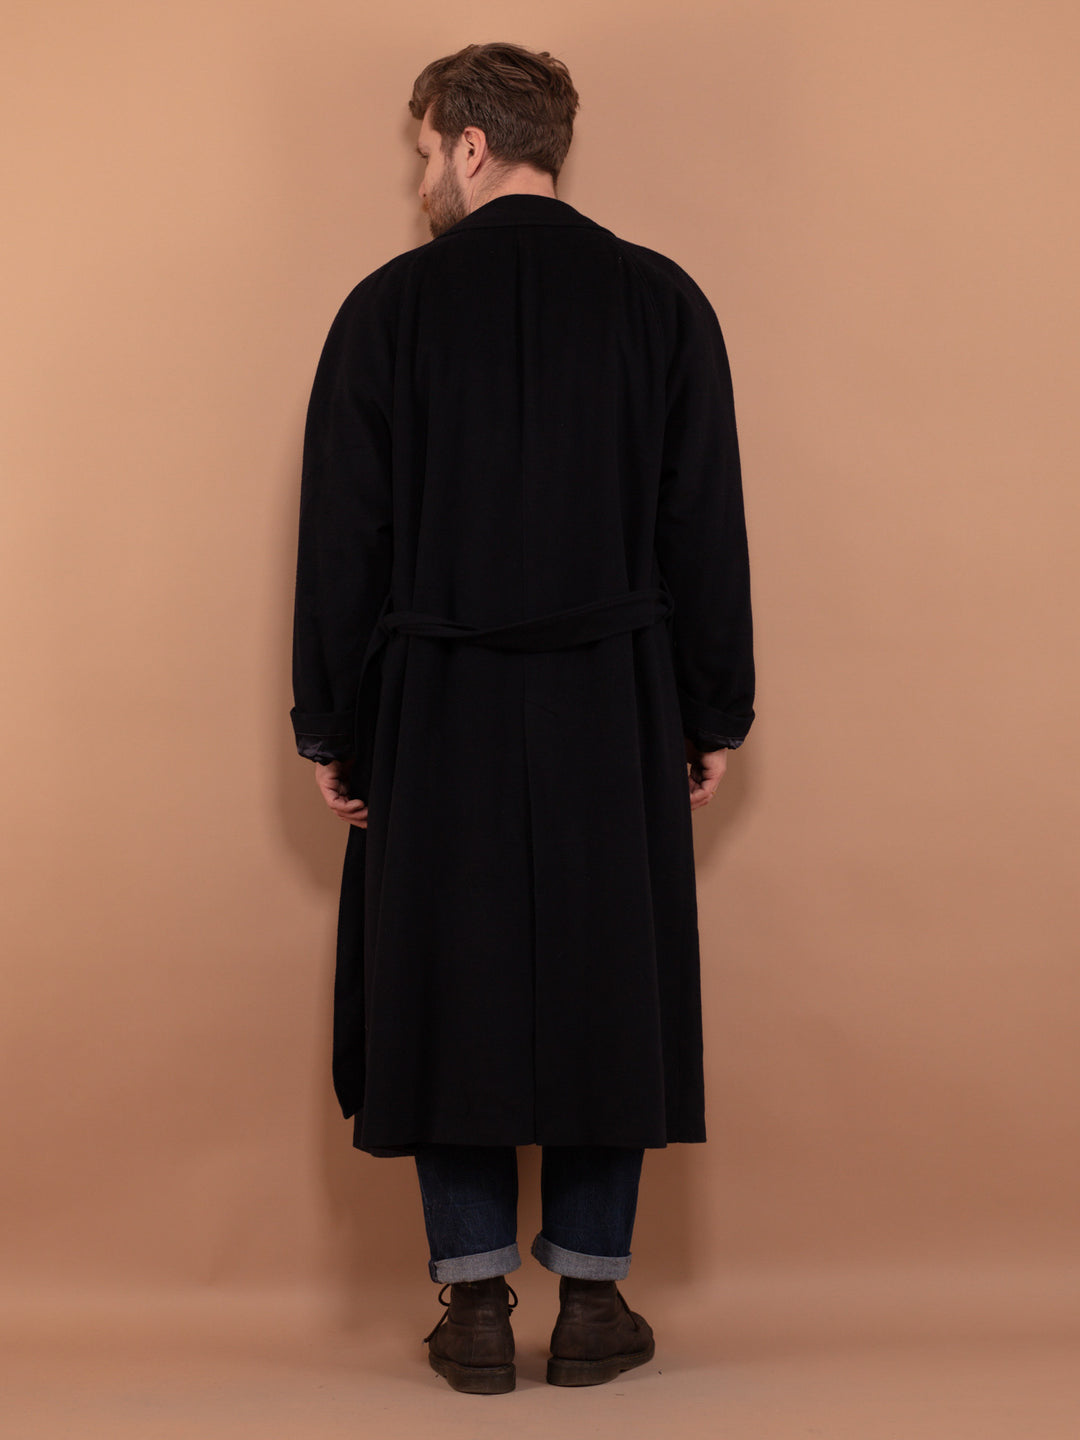 Wool and Cashmere Overcoat 80's, Size XXL, Vintage Greatcoat, Navy Blue Wool Blend Coat, Belted Maxi Coat, Long Oversized Coat, Outerwear